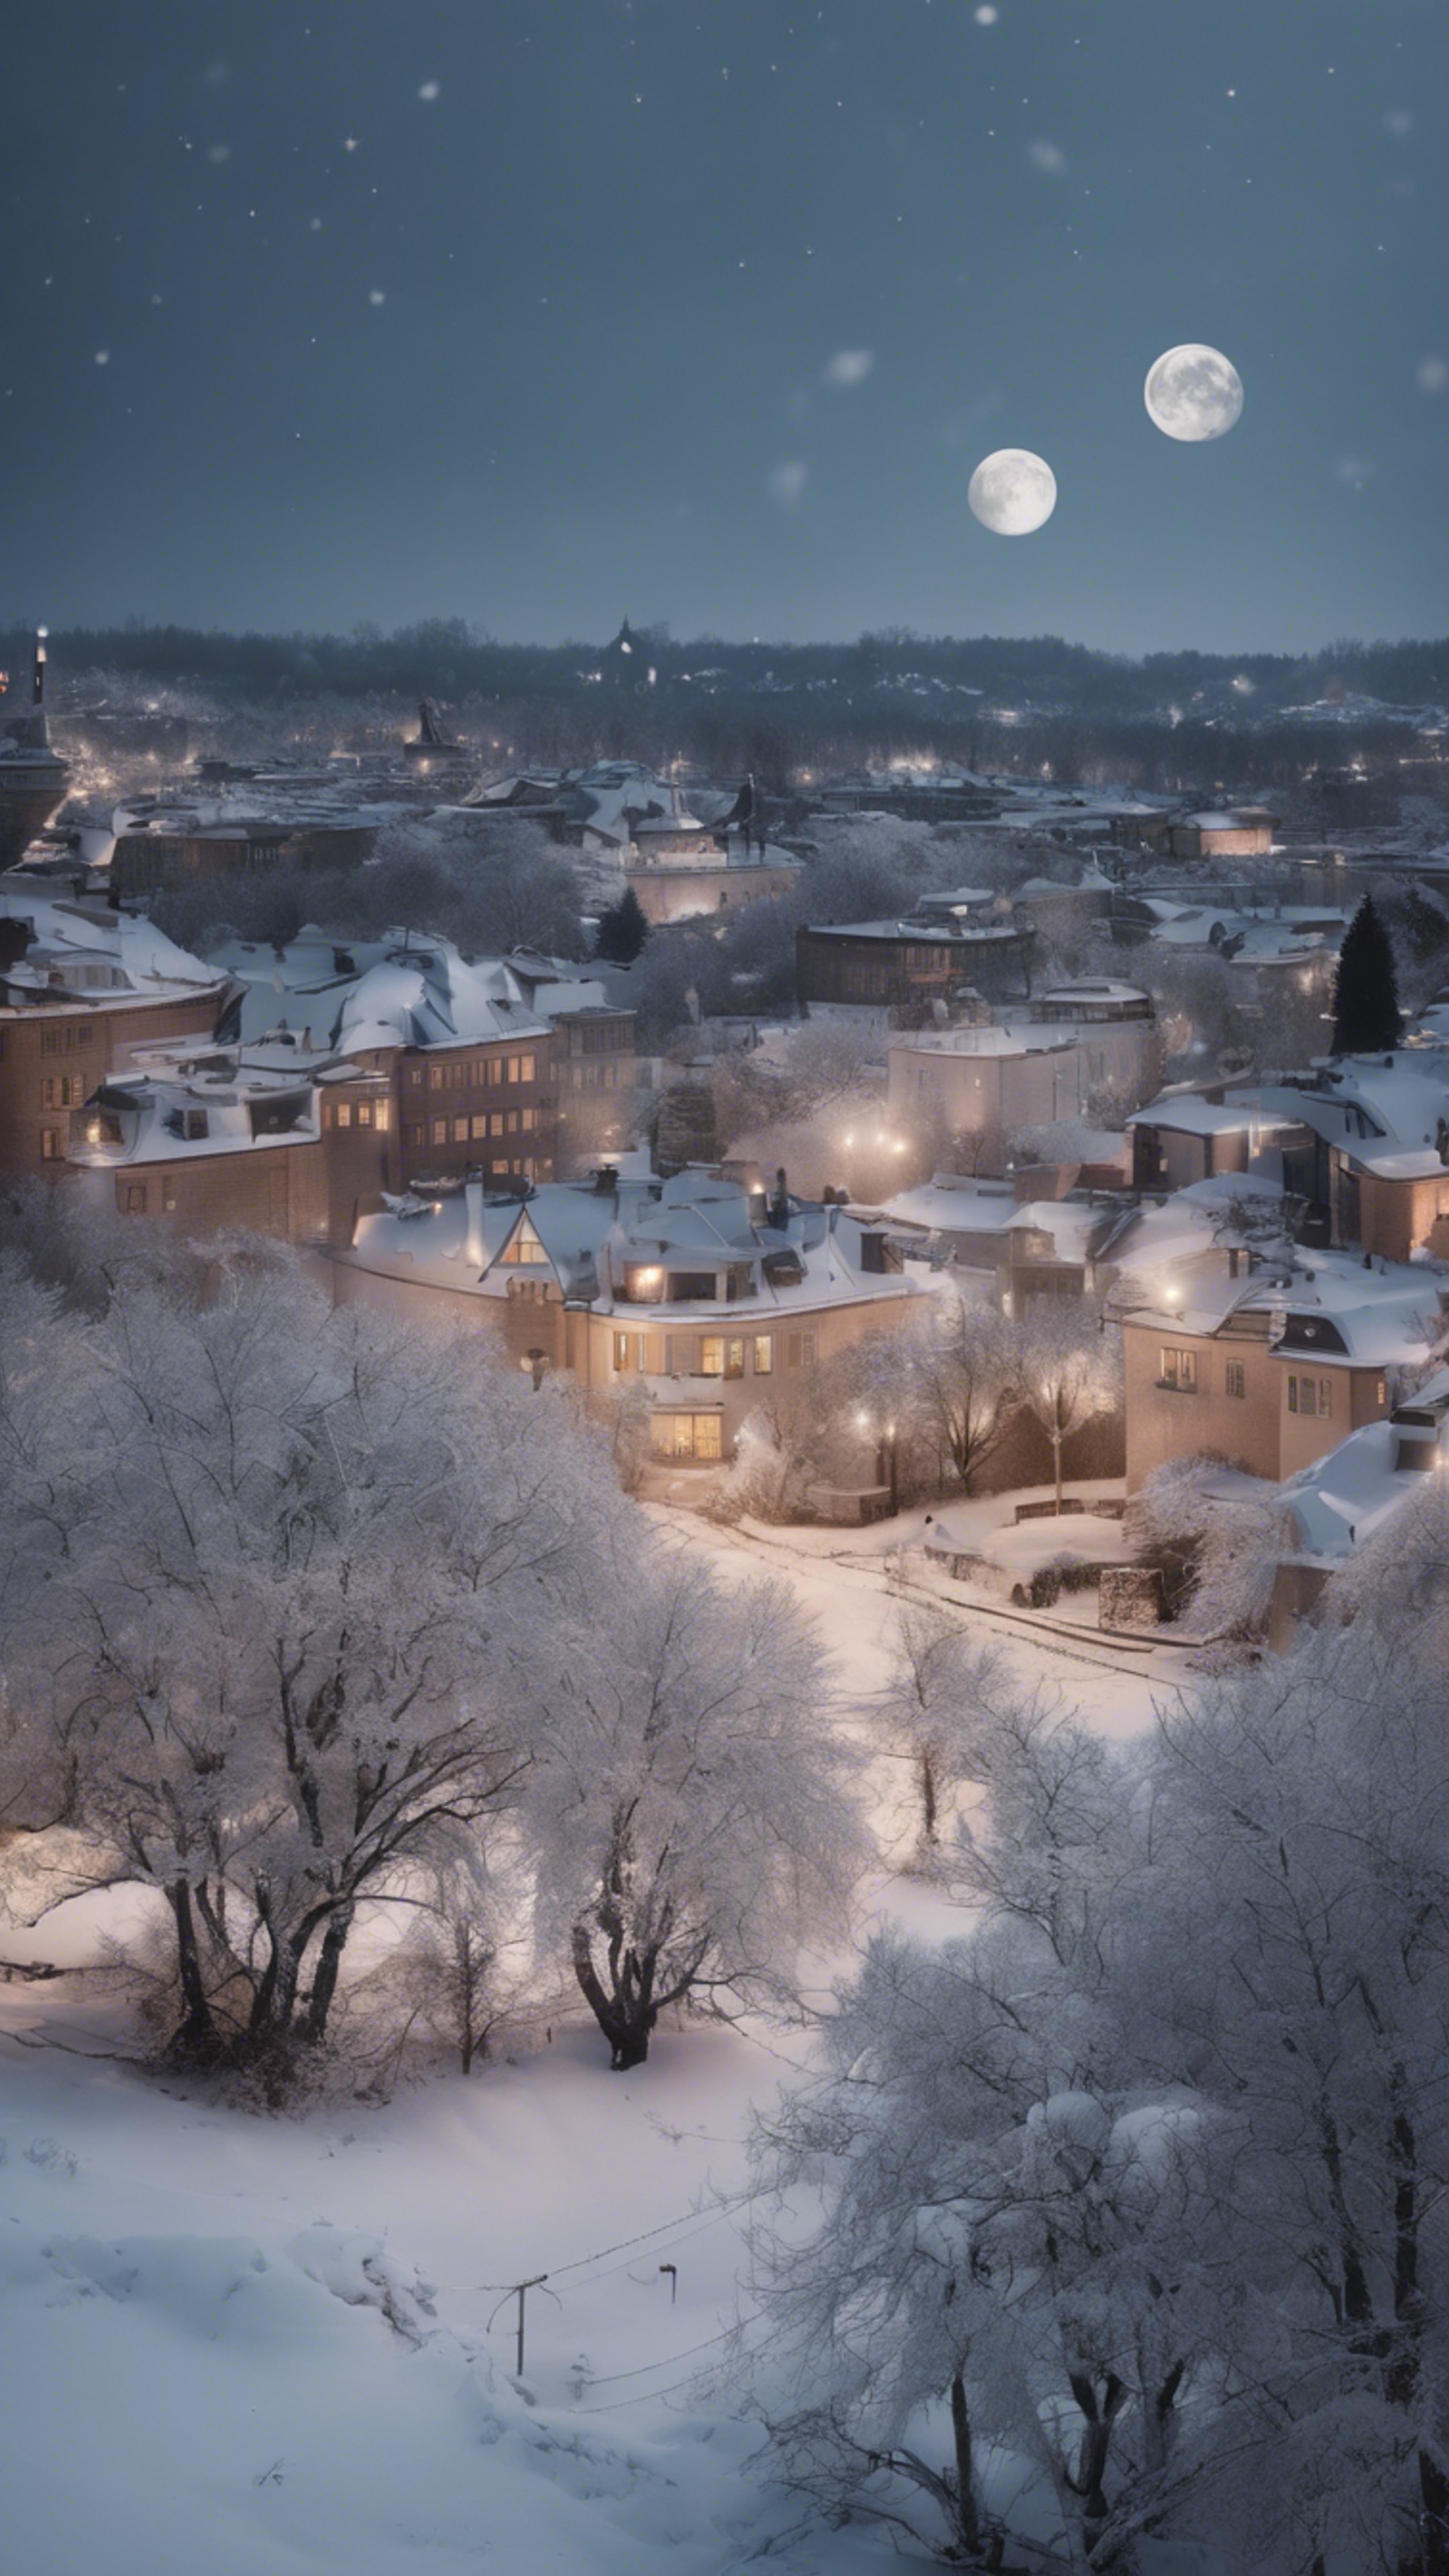 A snowy winter scene, the rooftops and trees covered by cool white snow, the moon casts a silvery glow on the serene town. Hintergrund[b59119720f8642b39e1c]